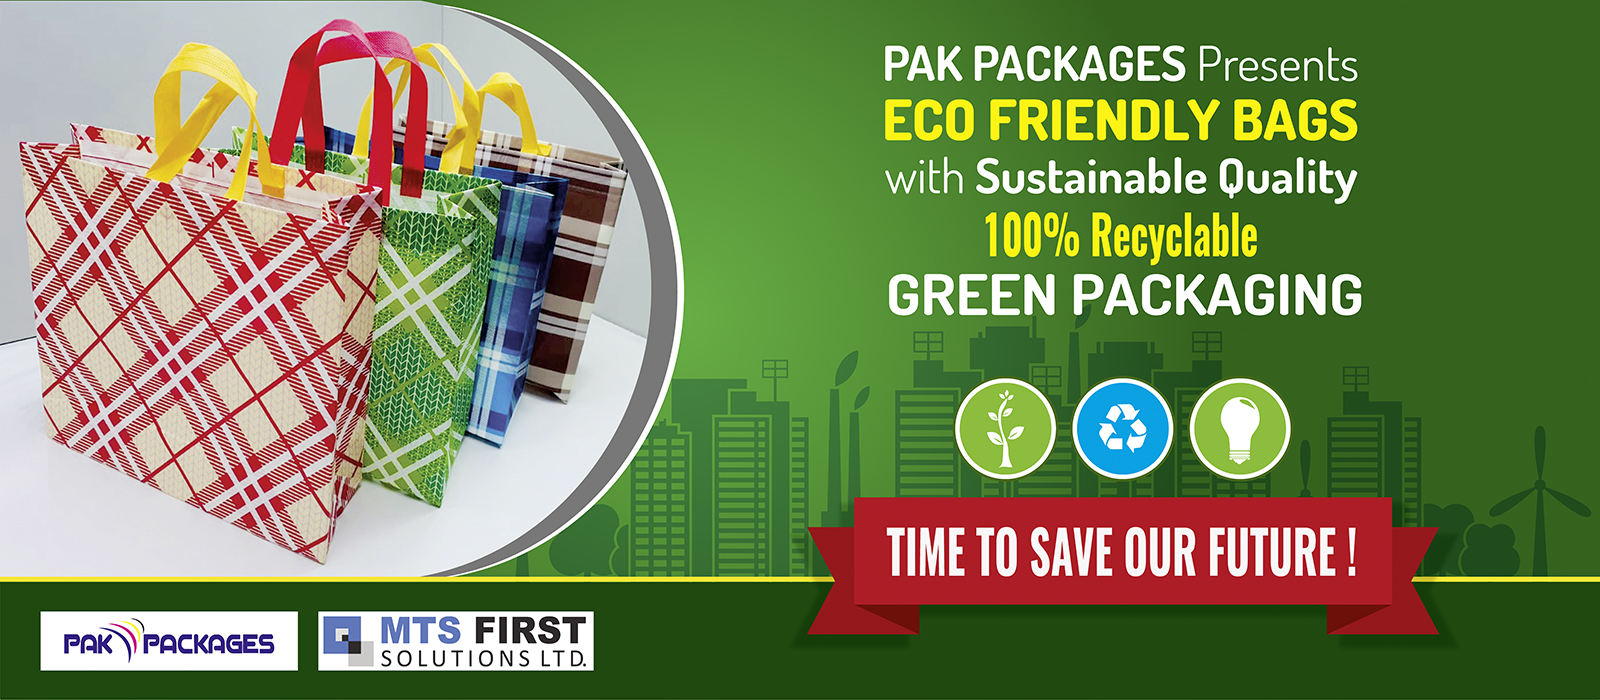 Pak Packages presents -Eco-friendly Bags- with Sustainable Quality. *Time to Save Our Future*